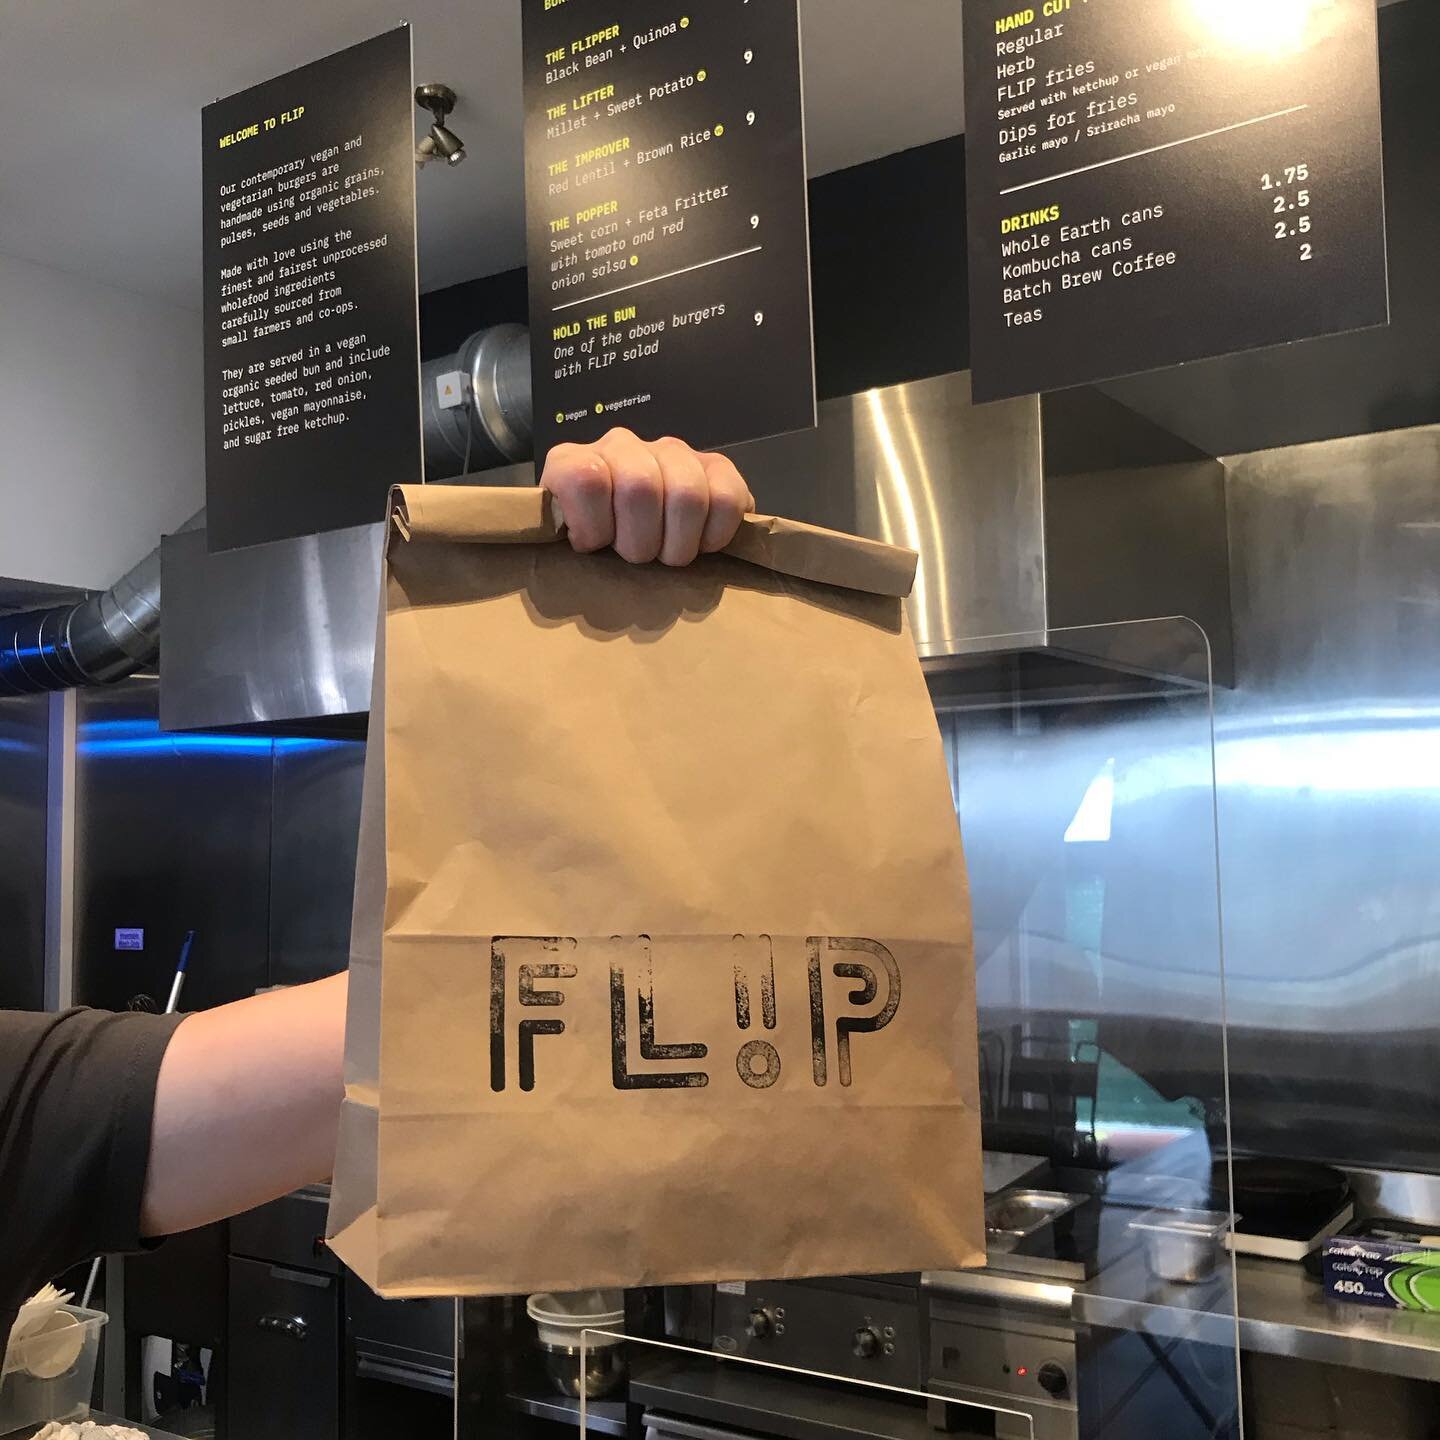 Good Morning loyal customers . Thank you for your continued support during these challenging times . 
Flip is now back to takeaway only and Deliveroo for next while . Our click and collect is also available in our bio . ⬆️
We will continue to flip yo